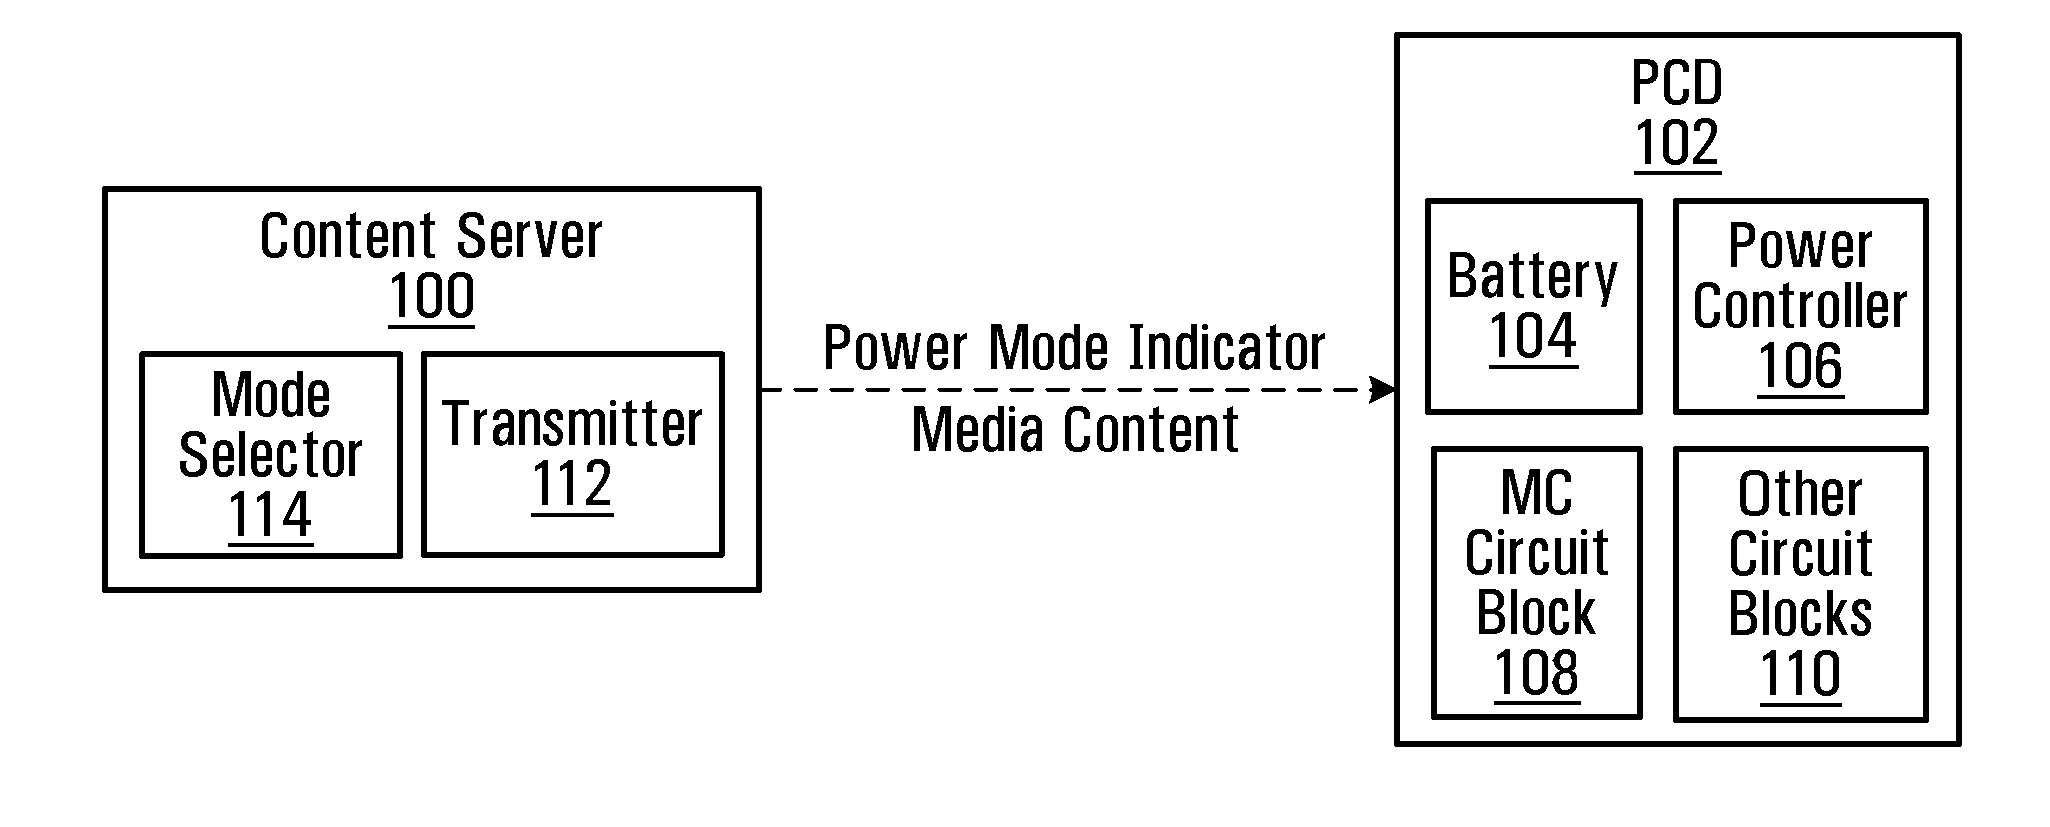 Server initiated power mode switching in portable communication devices